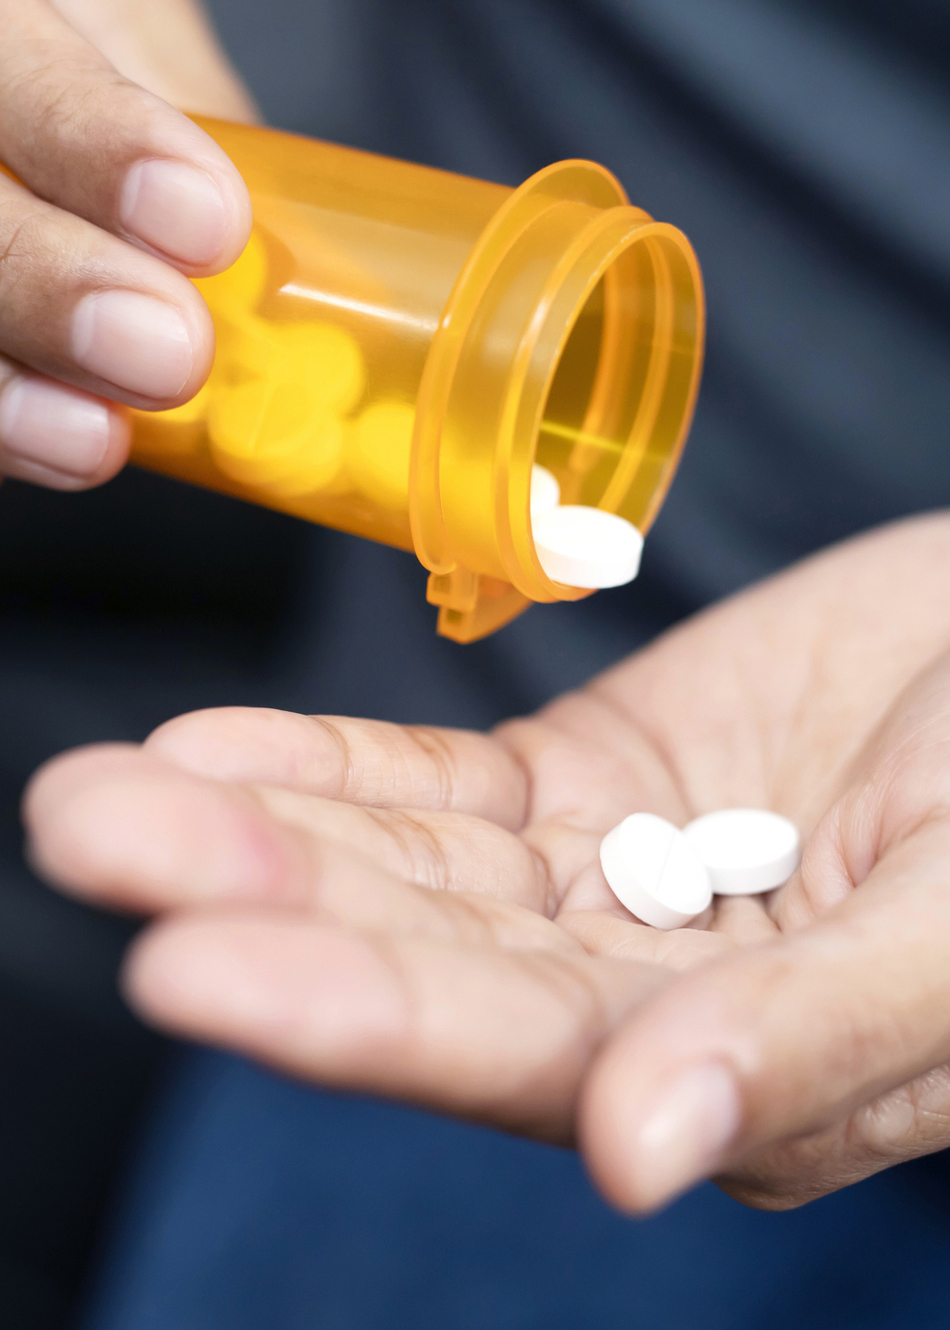 What Exactly is Opioid Addiction?